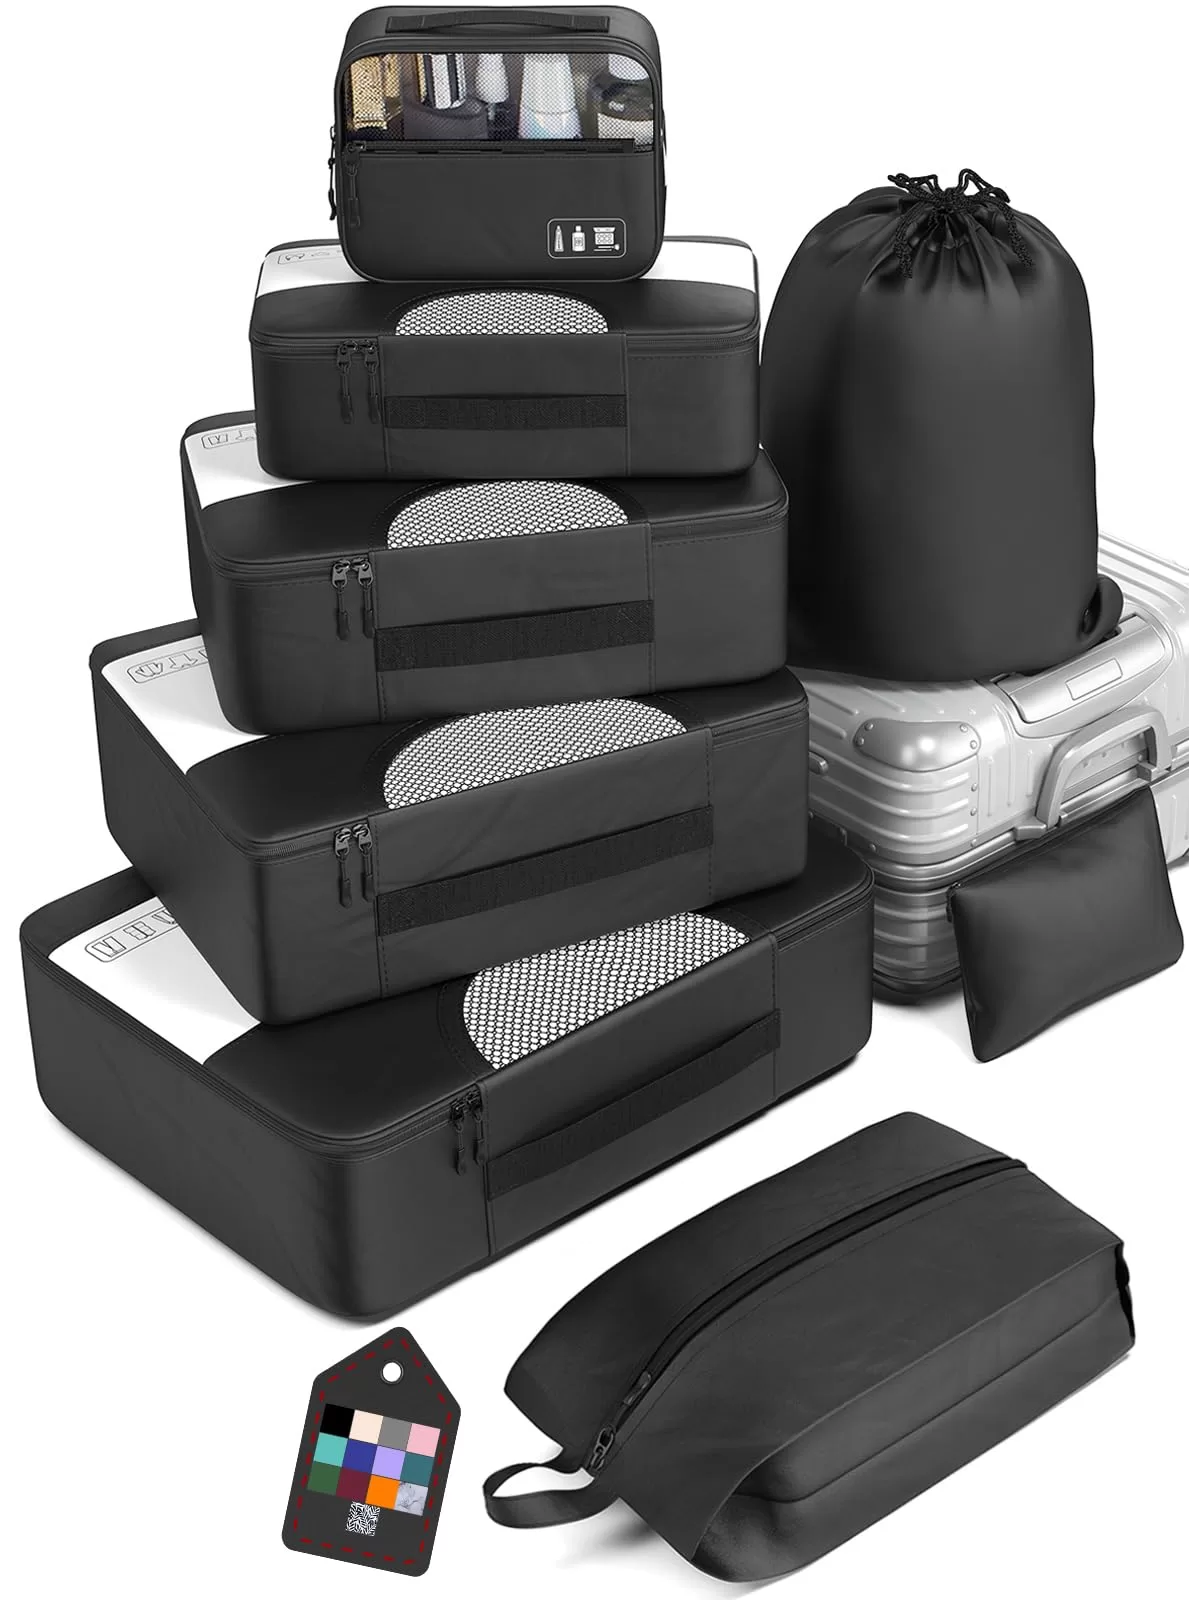 Best Packing Cubes for Travel cheaply